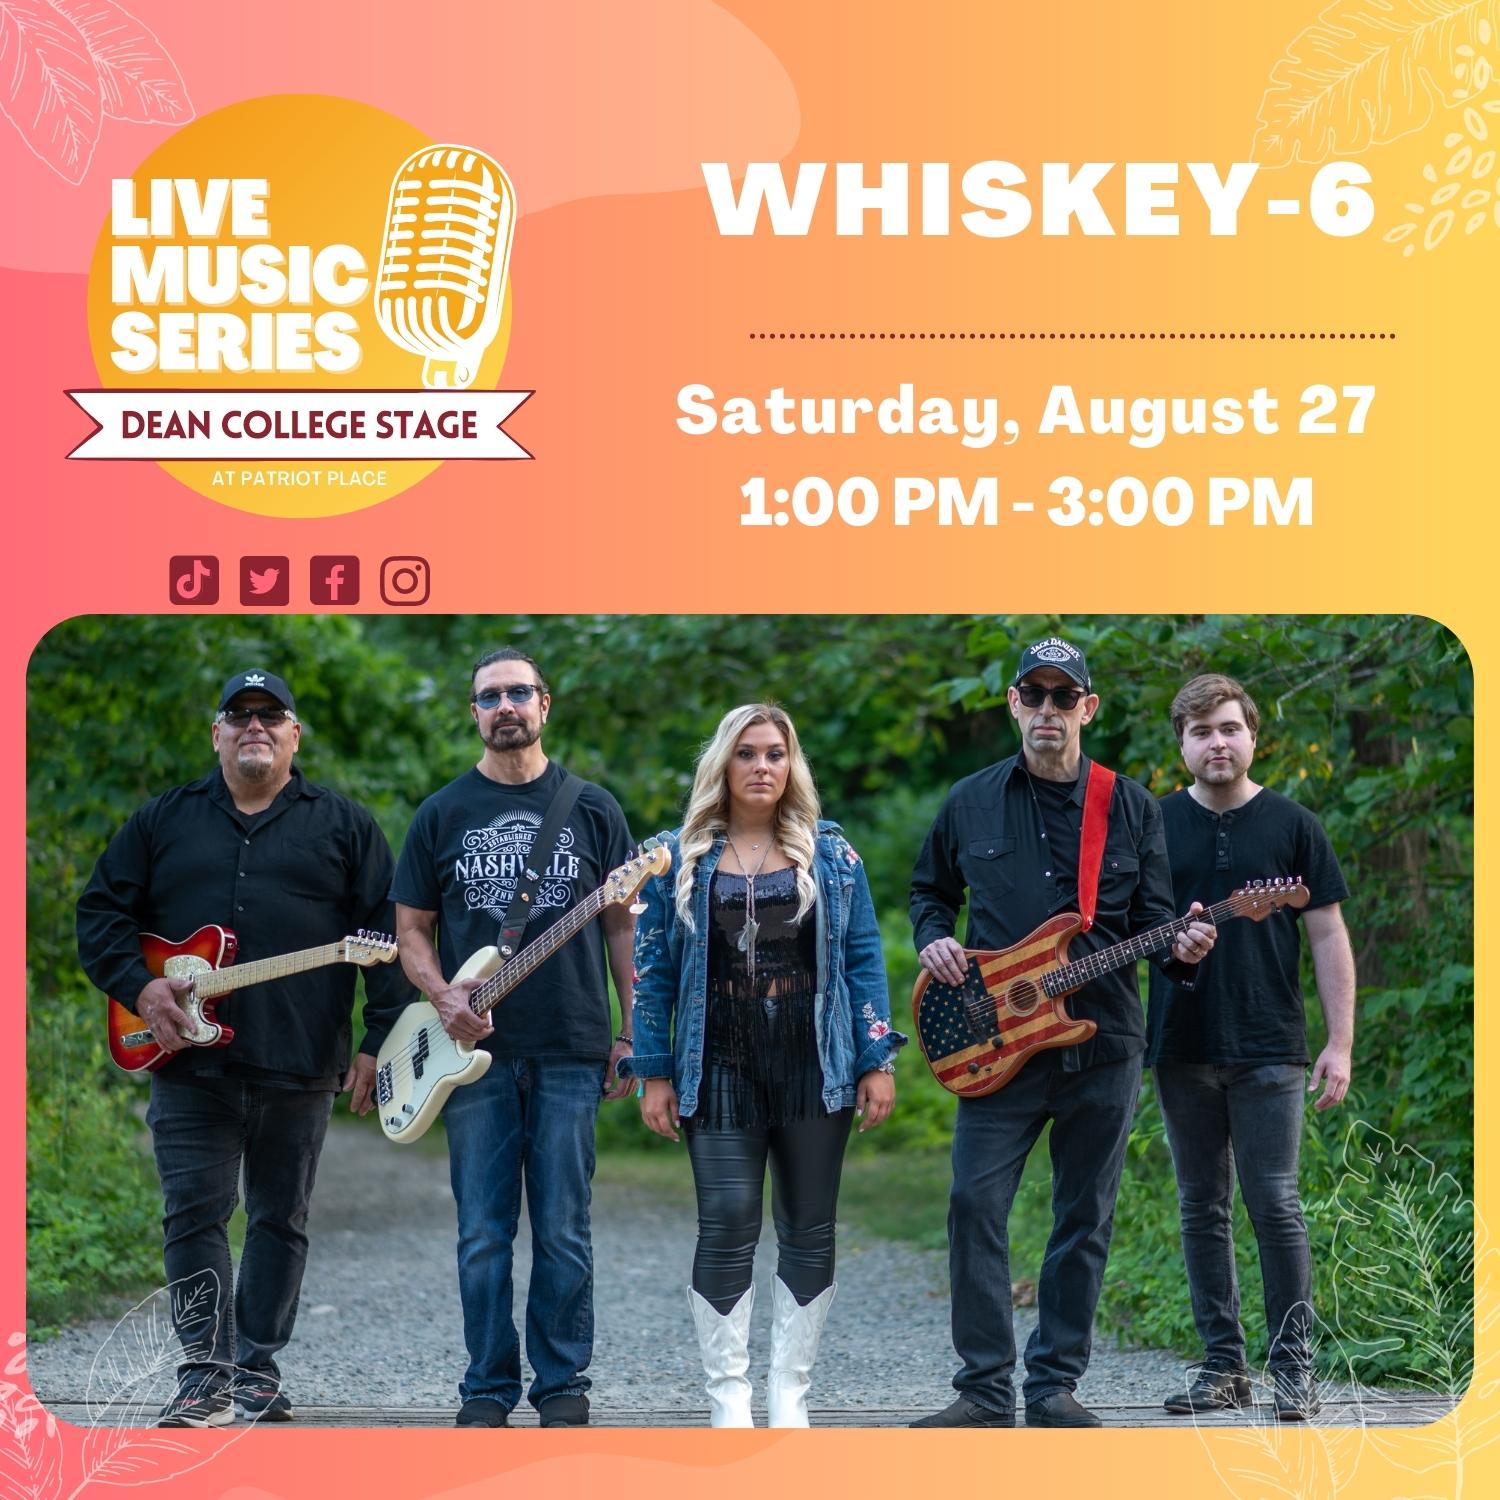 Live Music Series Whiskey-6 August 27